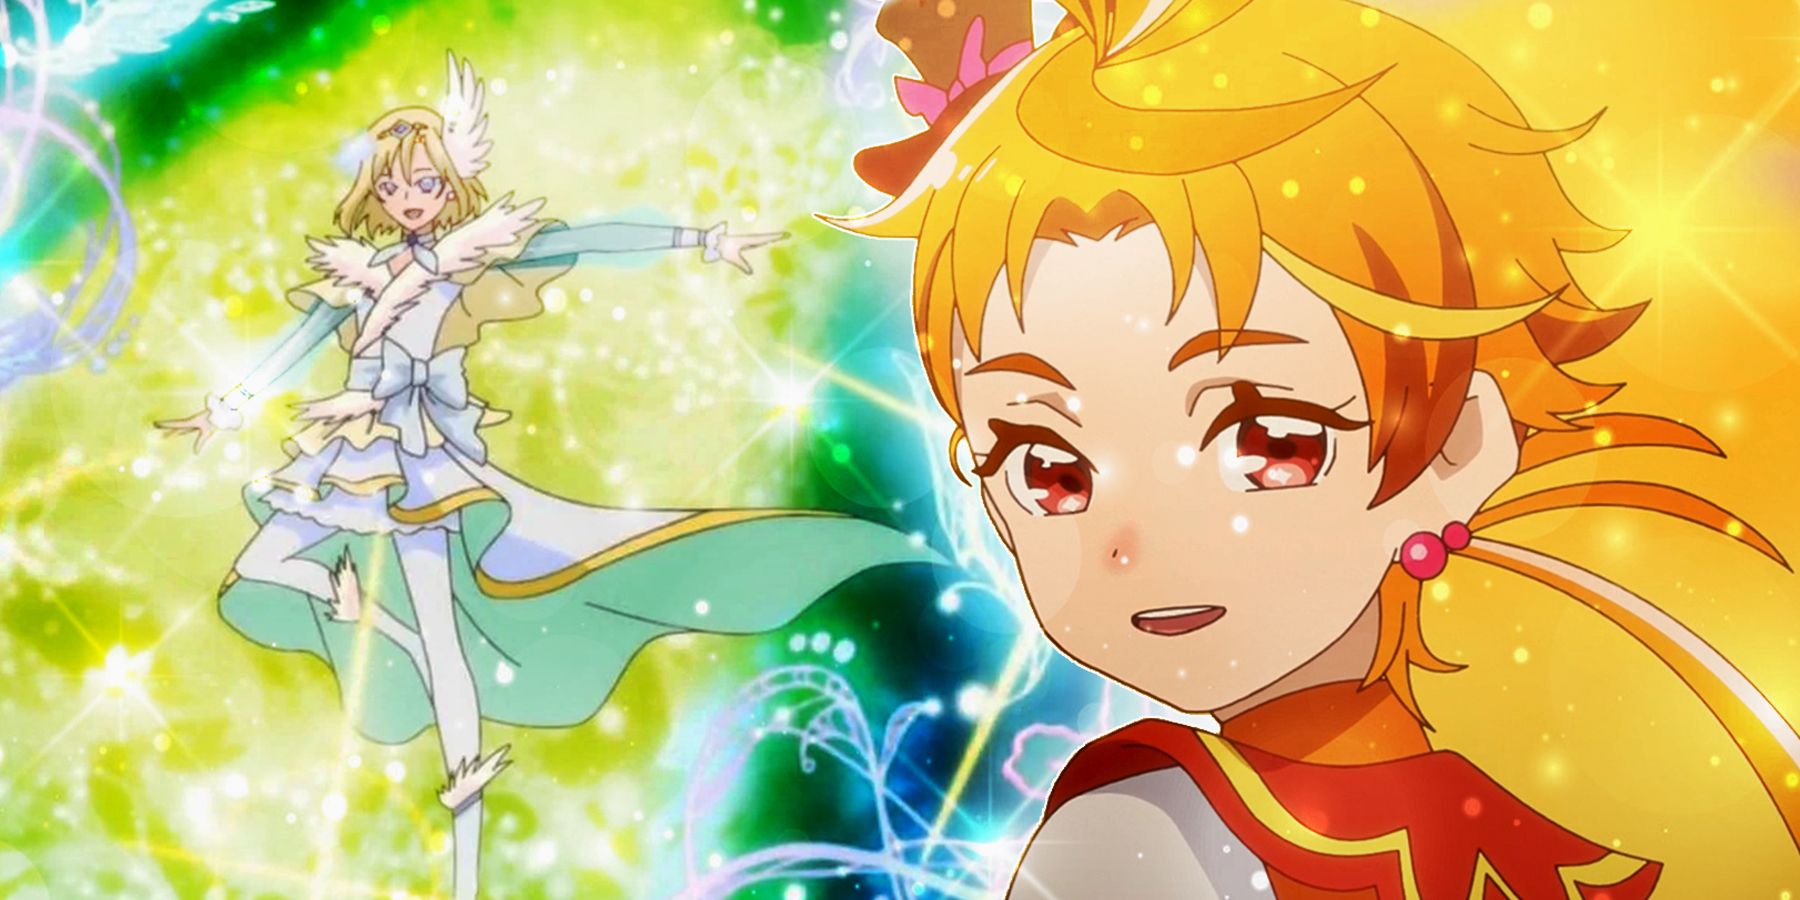 On the right, Wing from 'Hirogaru Sky' smiles and looks over their shoulder. On the left, Cure Infini from 'HUG! Precure' floats in the air among rays of light.